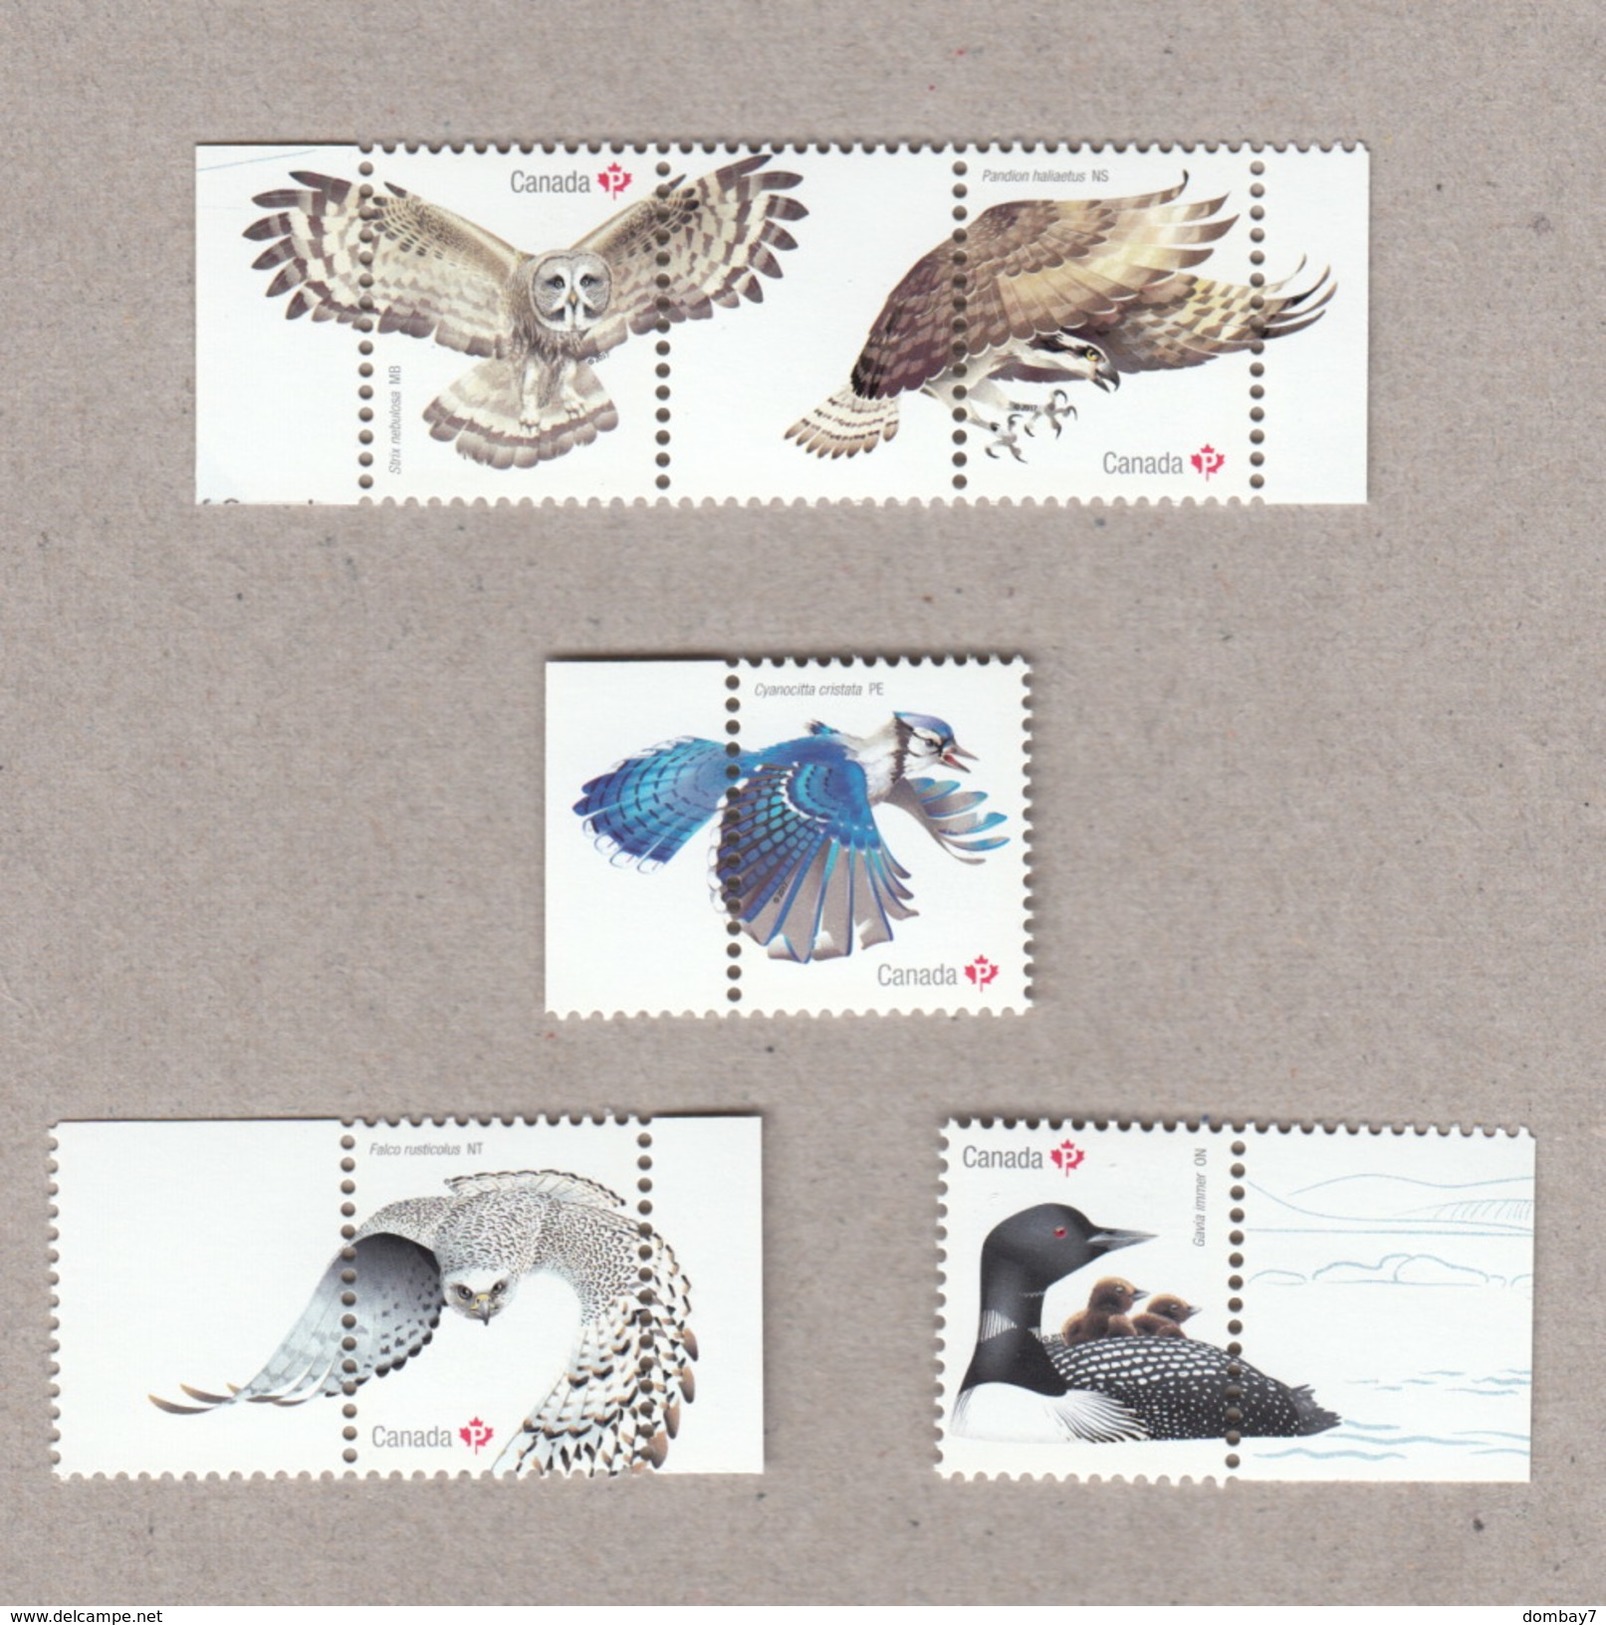 OWL, FALCON, OSPREY [FISH EAGLE / HAWK],birds Of Prey, BLUE JAY, LOON Set  5 Souvenir Sheet Stamps Birds Of Canada 2017 - Arends & Roofvogels